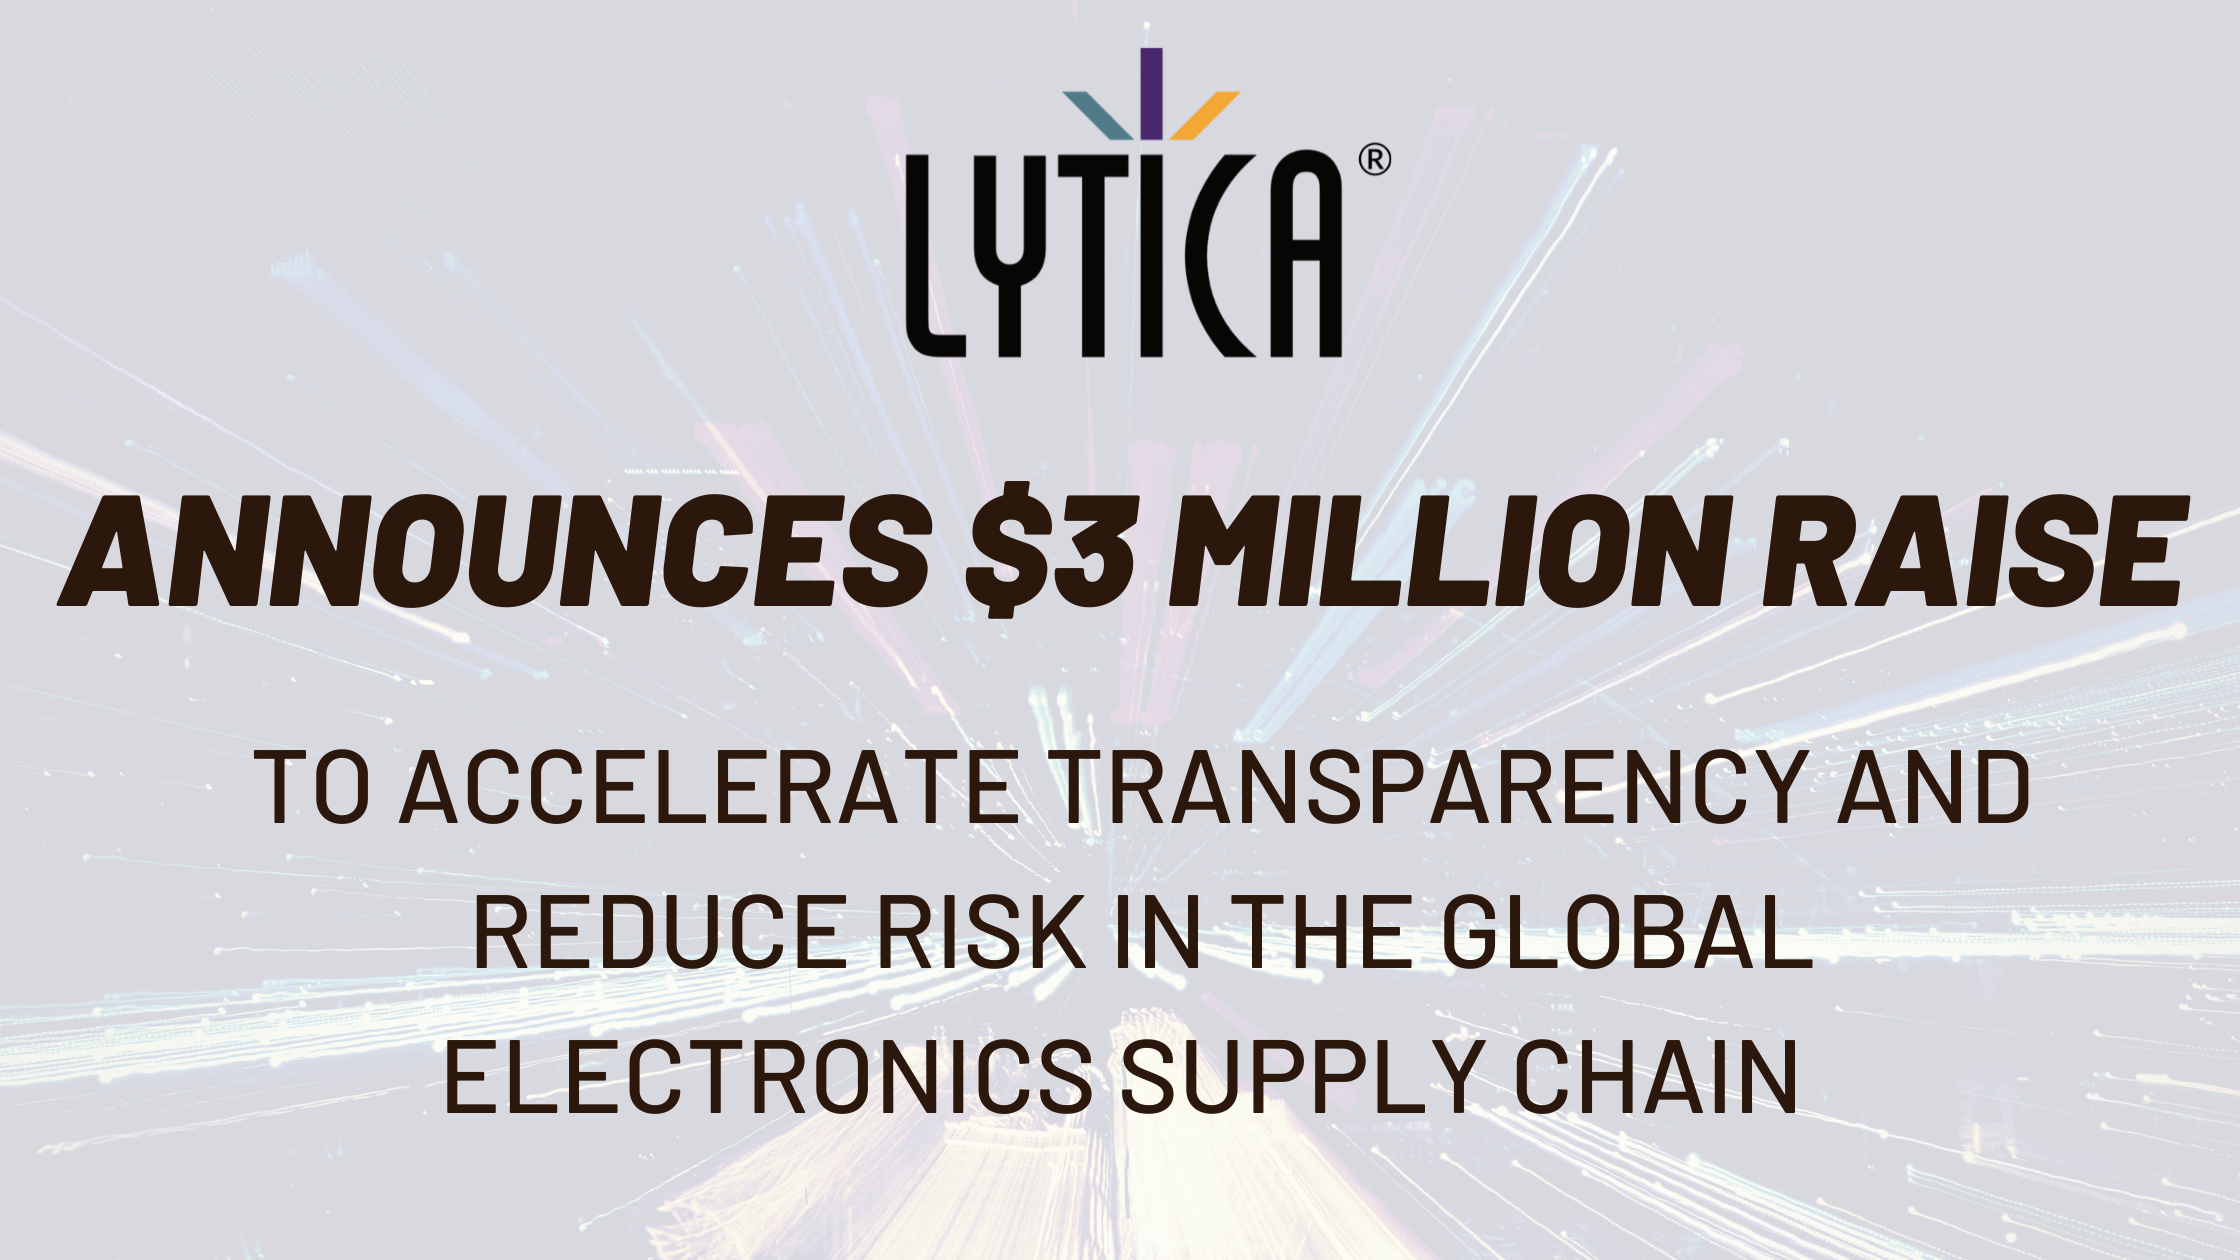 Lytica, Wednesday, August 25, 2021, Press release picture